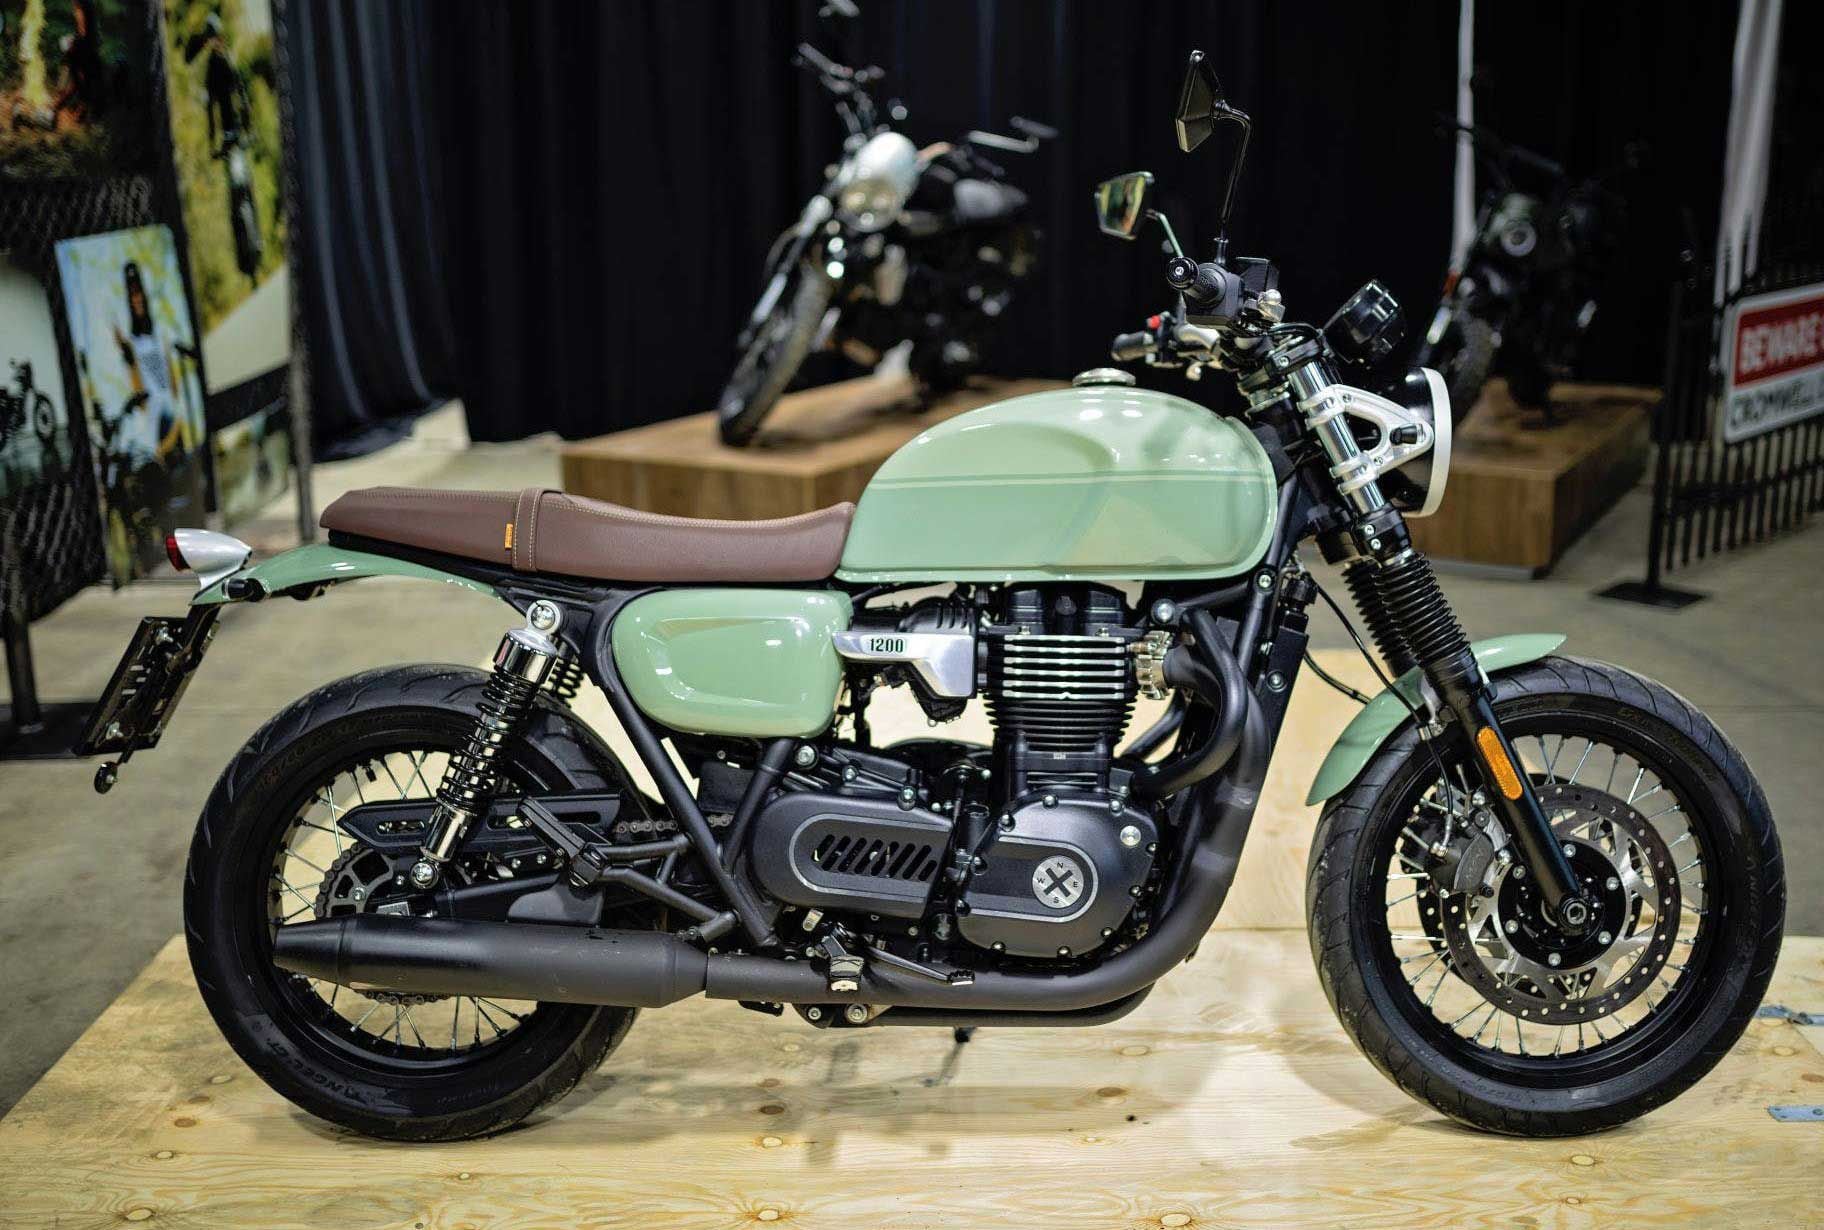 Brit-bike (and Bonneville) retro cues abound, from spoke wheels and exposed rear shocks to a bench saddle and tank knee pads.